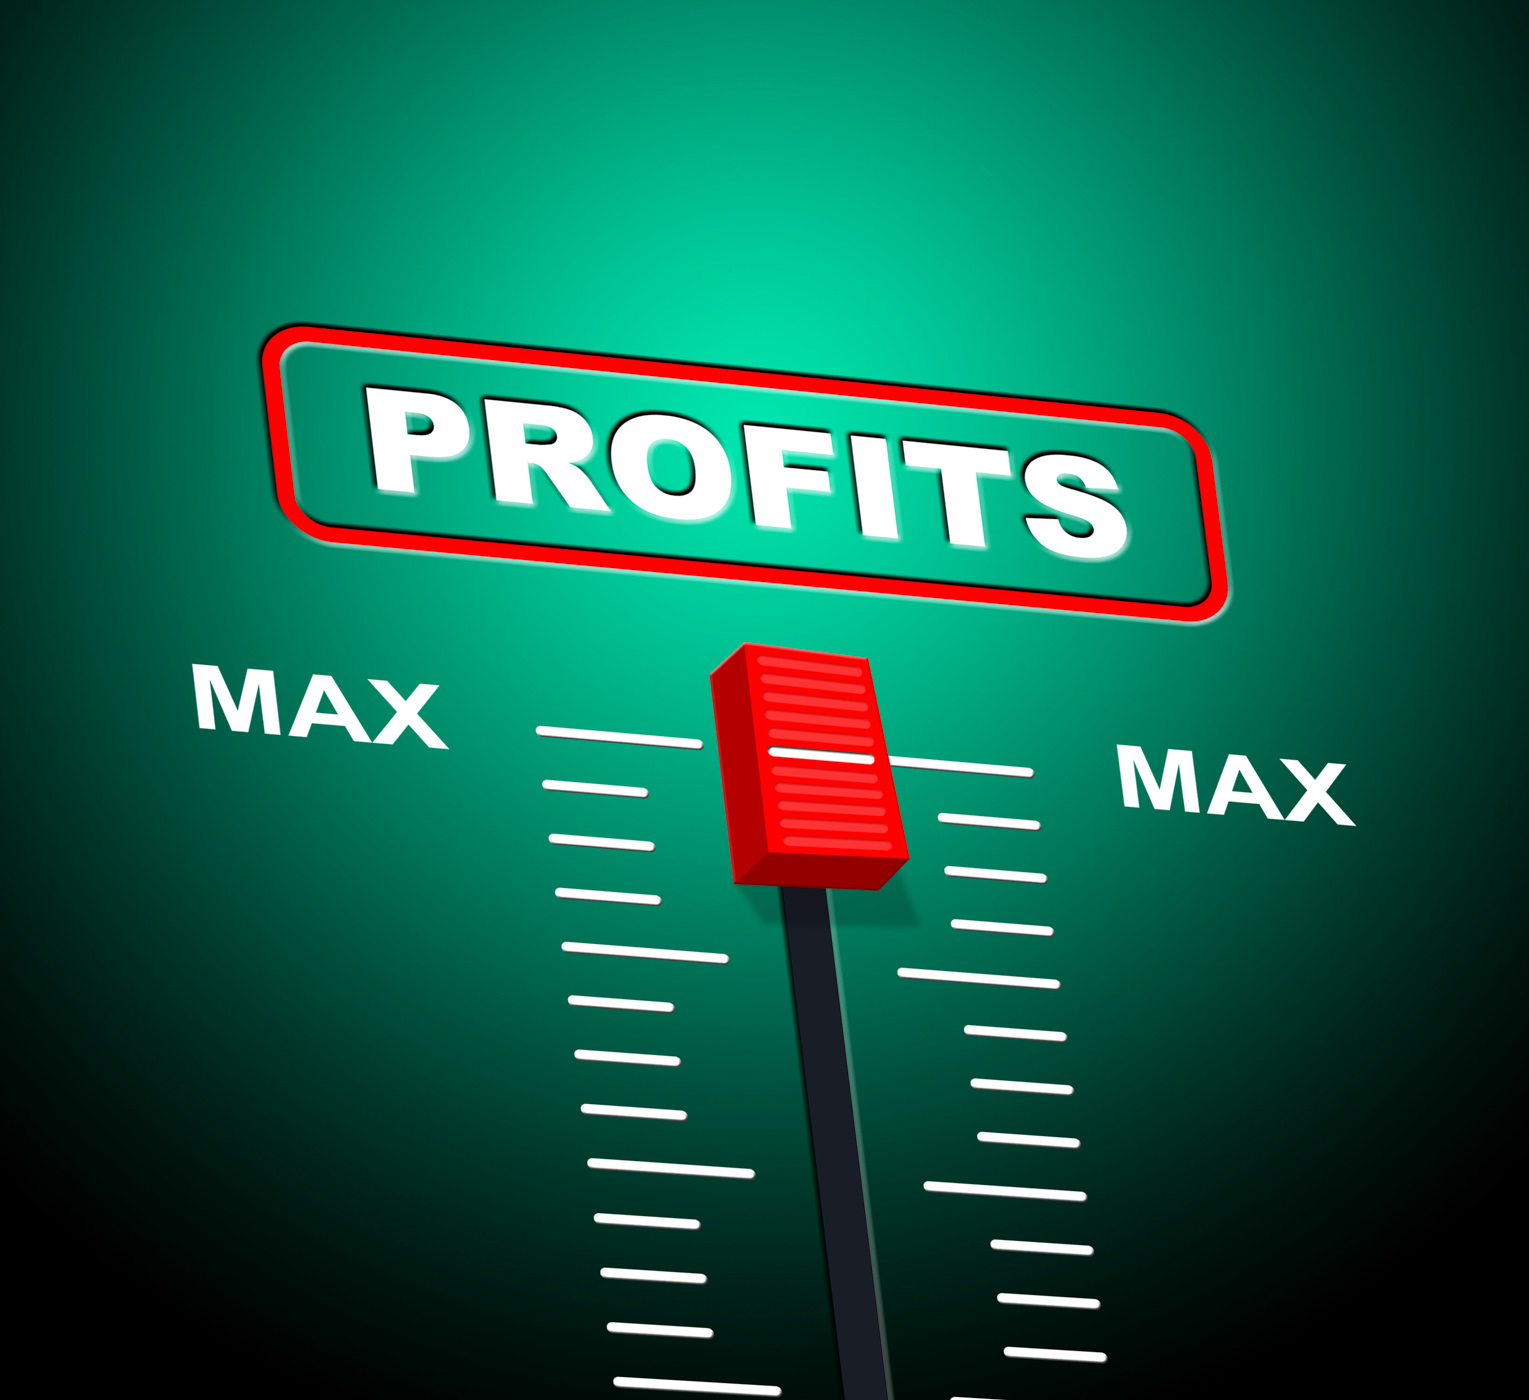 Max Profits Indicates Upper Limit And Ceiling, Ceiling, Max, Upperlimit, Top, HQ Photo